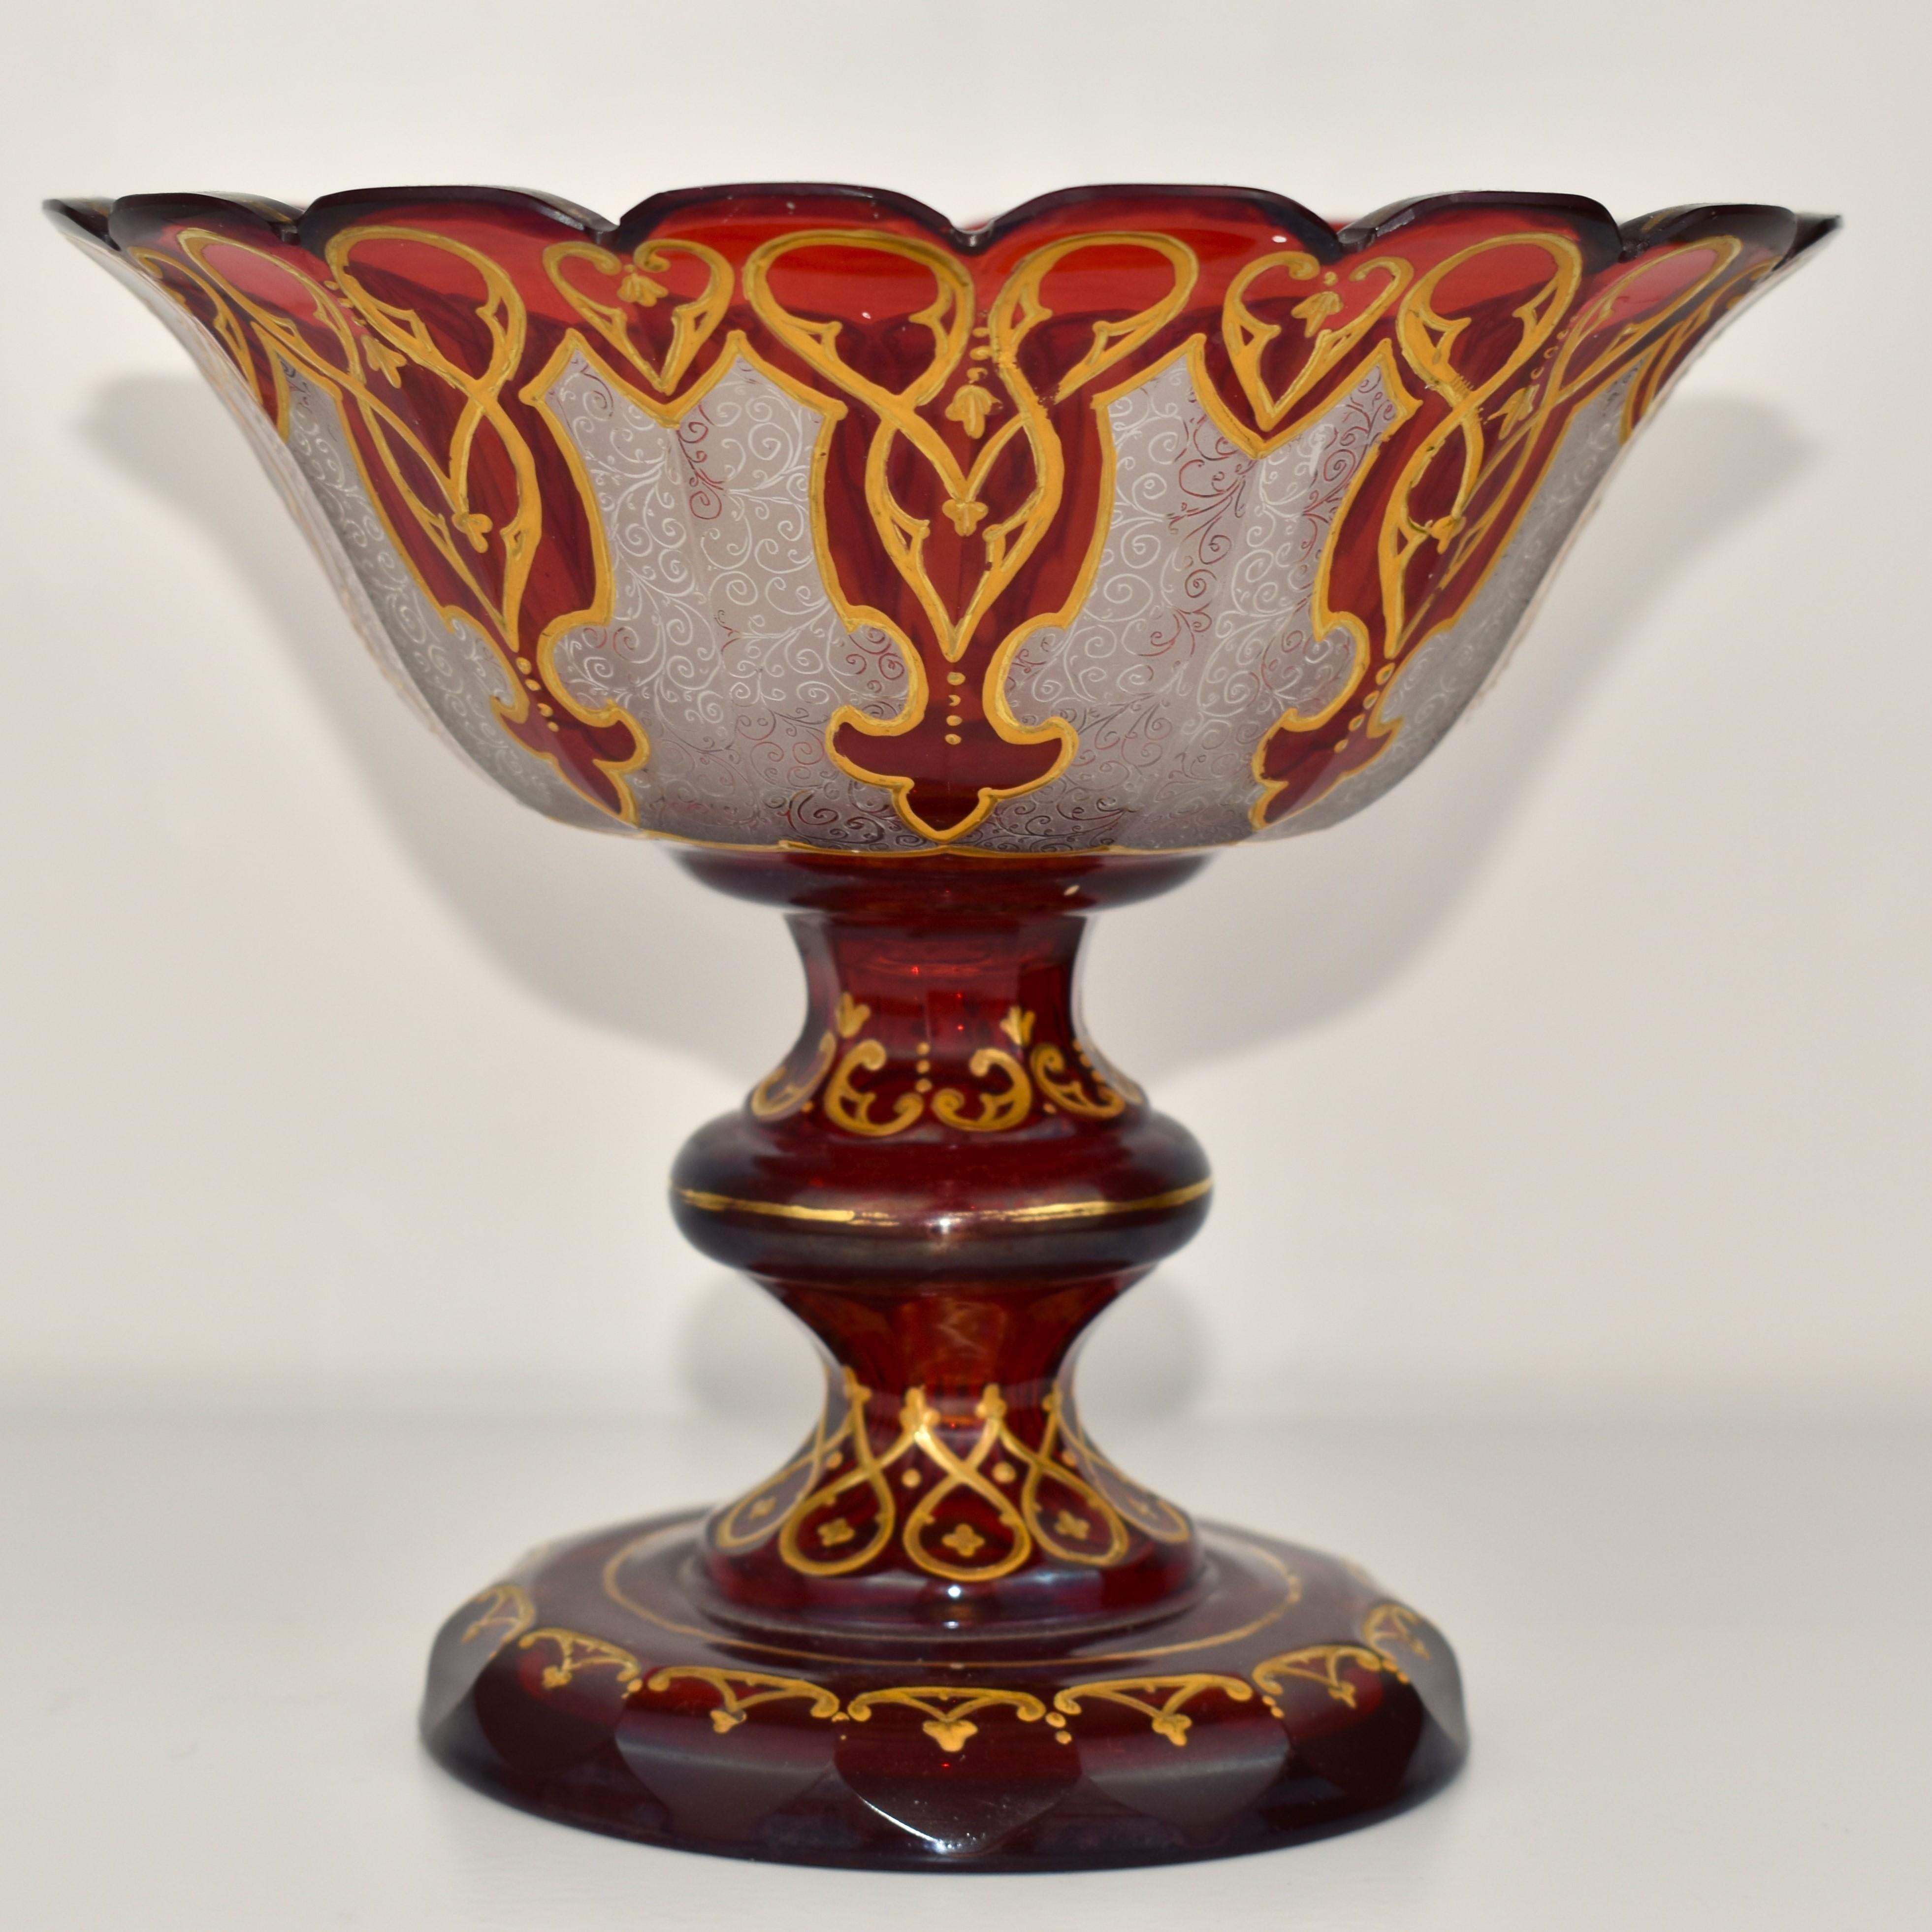 Exquisite Serving Centerpiece, Tazza Bowl, Candy Bowl, in Ruby Red Bohemian Cut-Glass

Richly Decorated All Around with Fine Hand-Painted Gilded Enamel

Gilded Wavy Rim

Fine Example of the Highest Quality Bohemian Glass of the 19th century

Circa